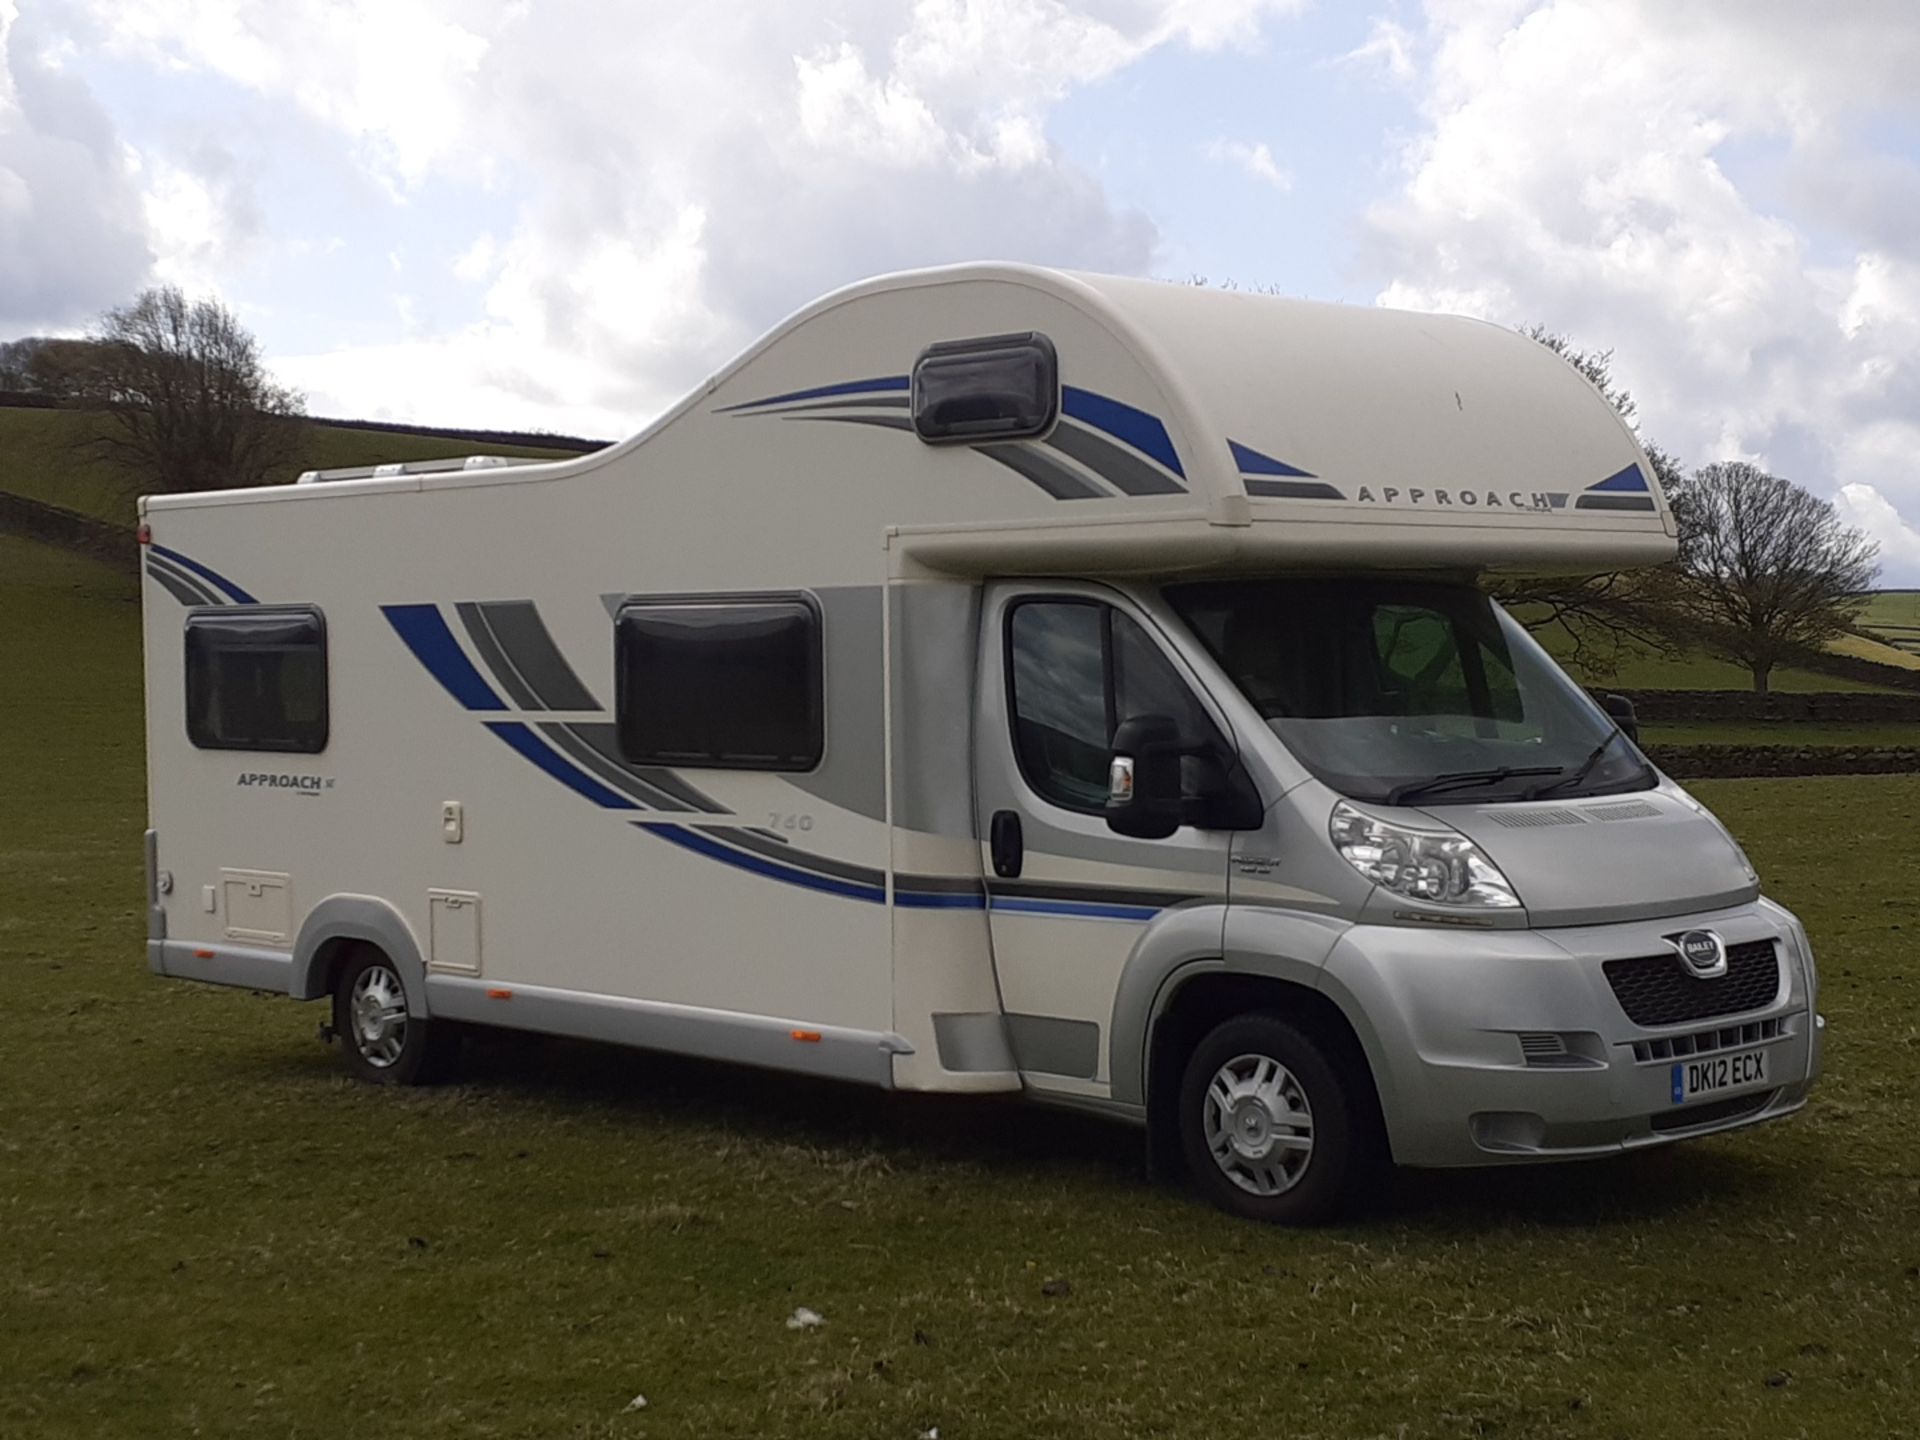 2012 BAILEY APPROACH 760 SE LUXURY 6 BERTH MOTORHOME £10K OF EXTRAS, 30,000 MILES FROM NEW - Image 2 of 31